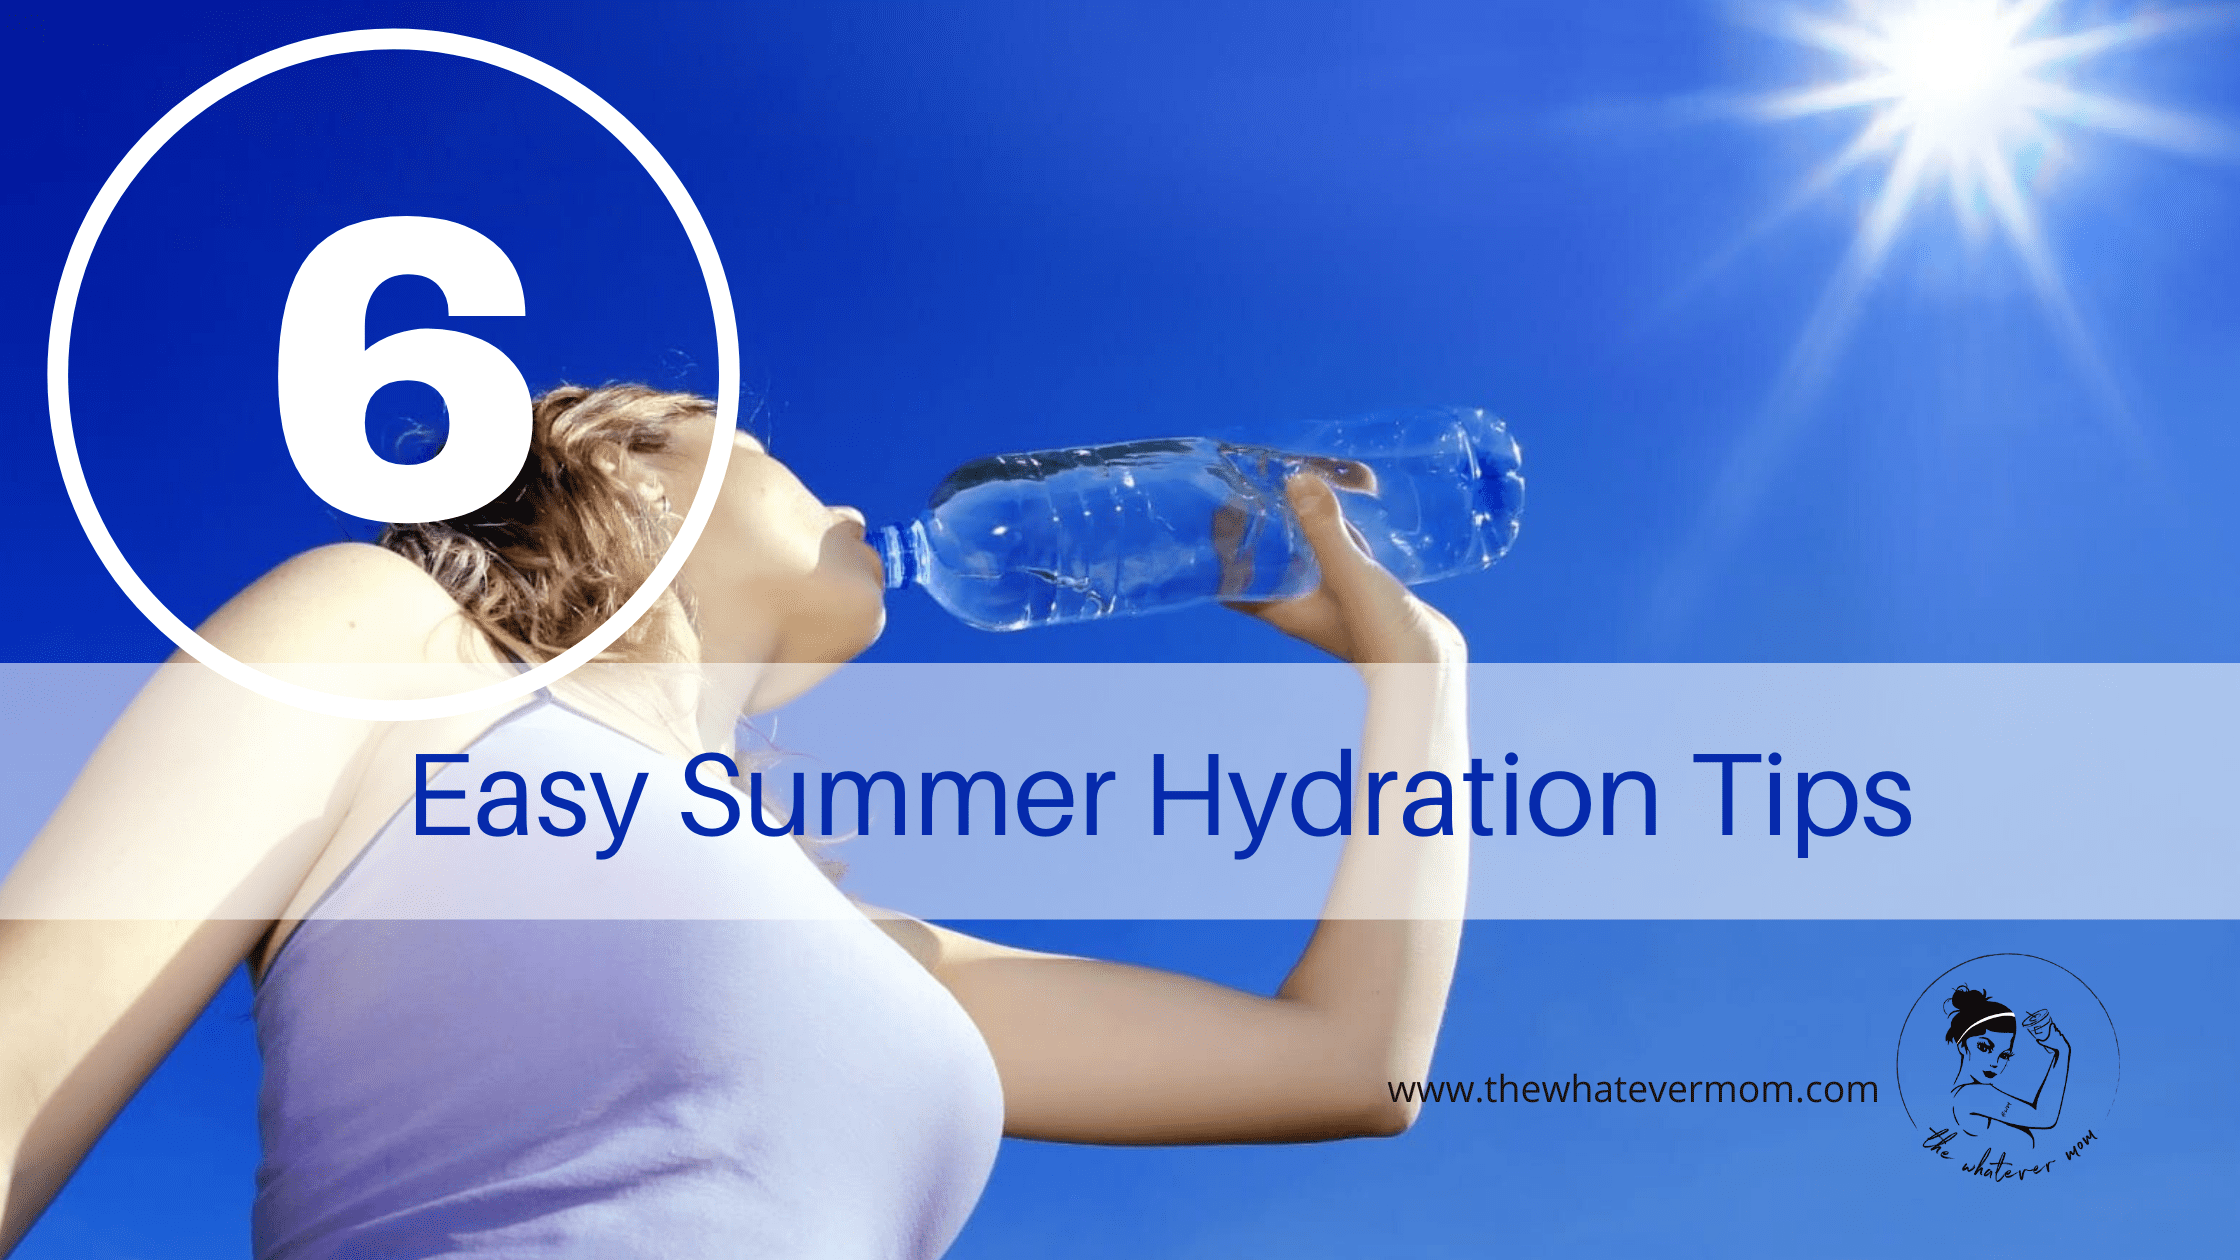 https://thewhatevermom.com/wp-content/uploads/2020/06/Easy-Summer-Hydration-Tips.png